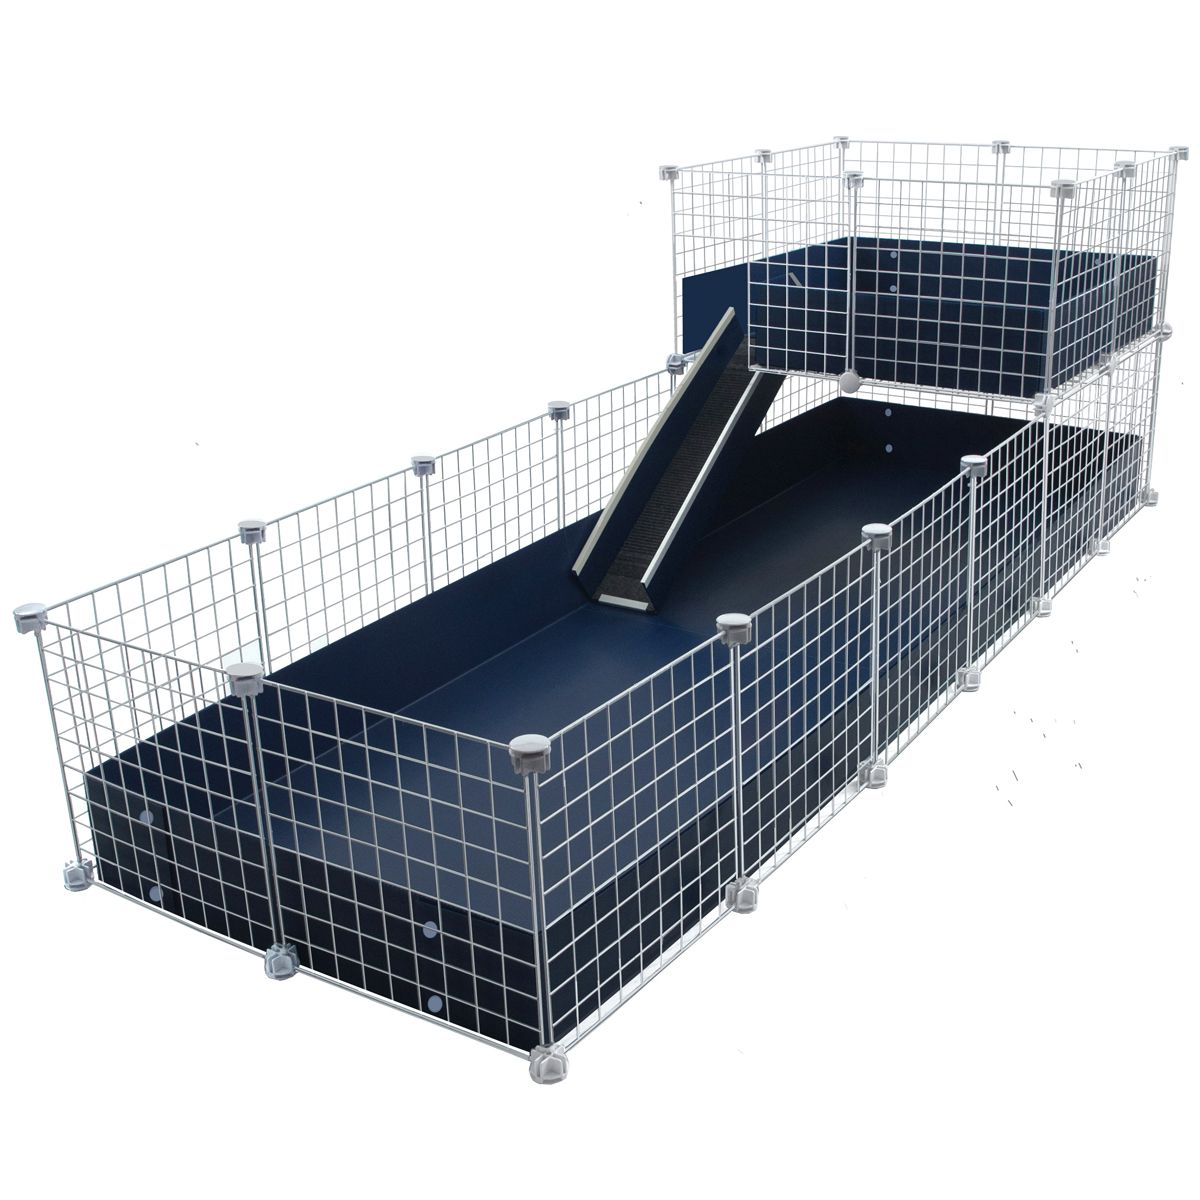 Cagetopia Jumbo with a Wide Loft, 2x6 grids